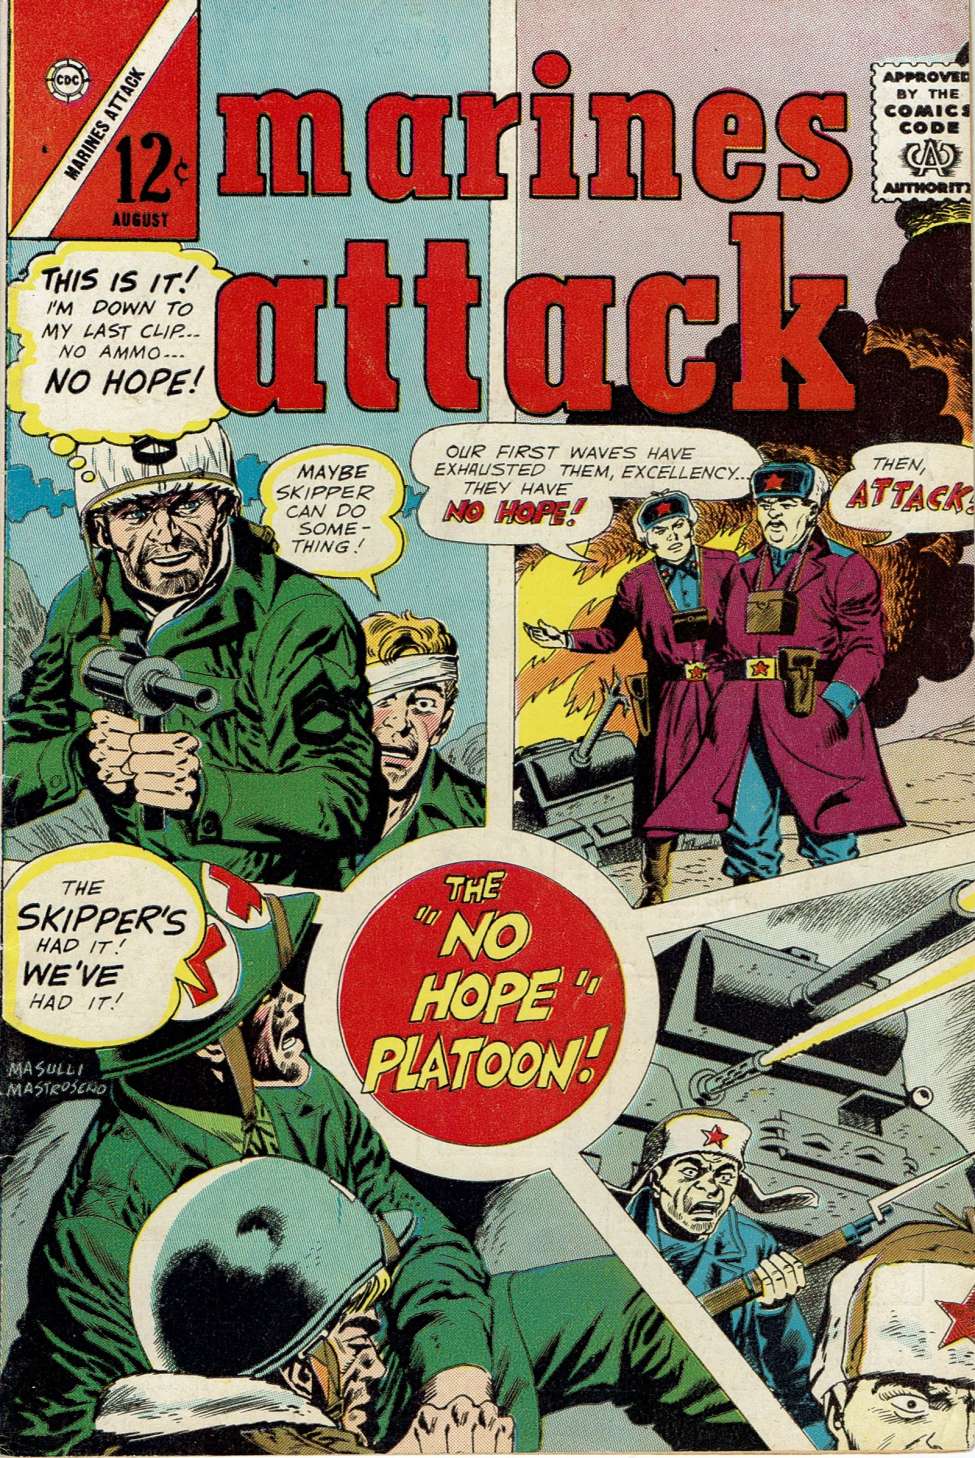 Comic Book Cover For Marines Attack 6 - Version 1